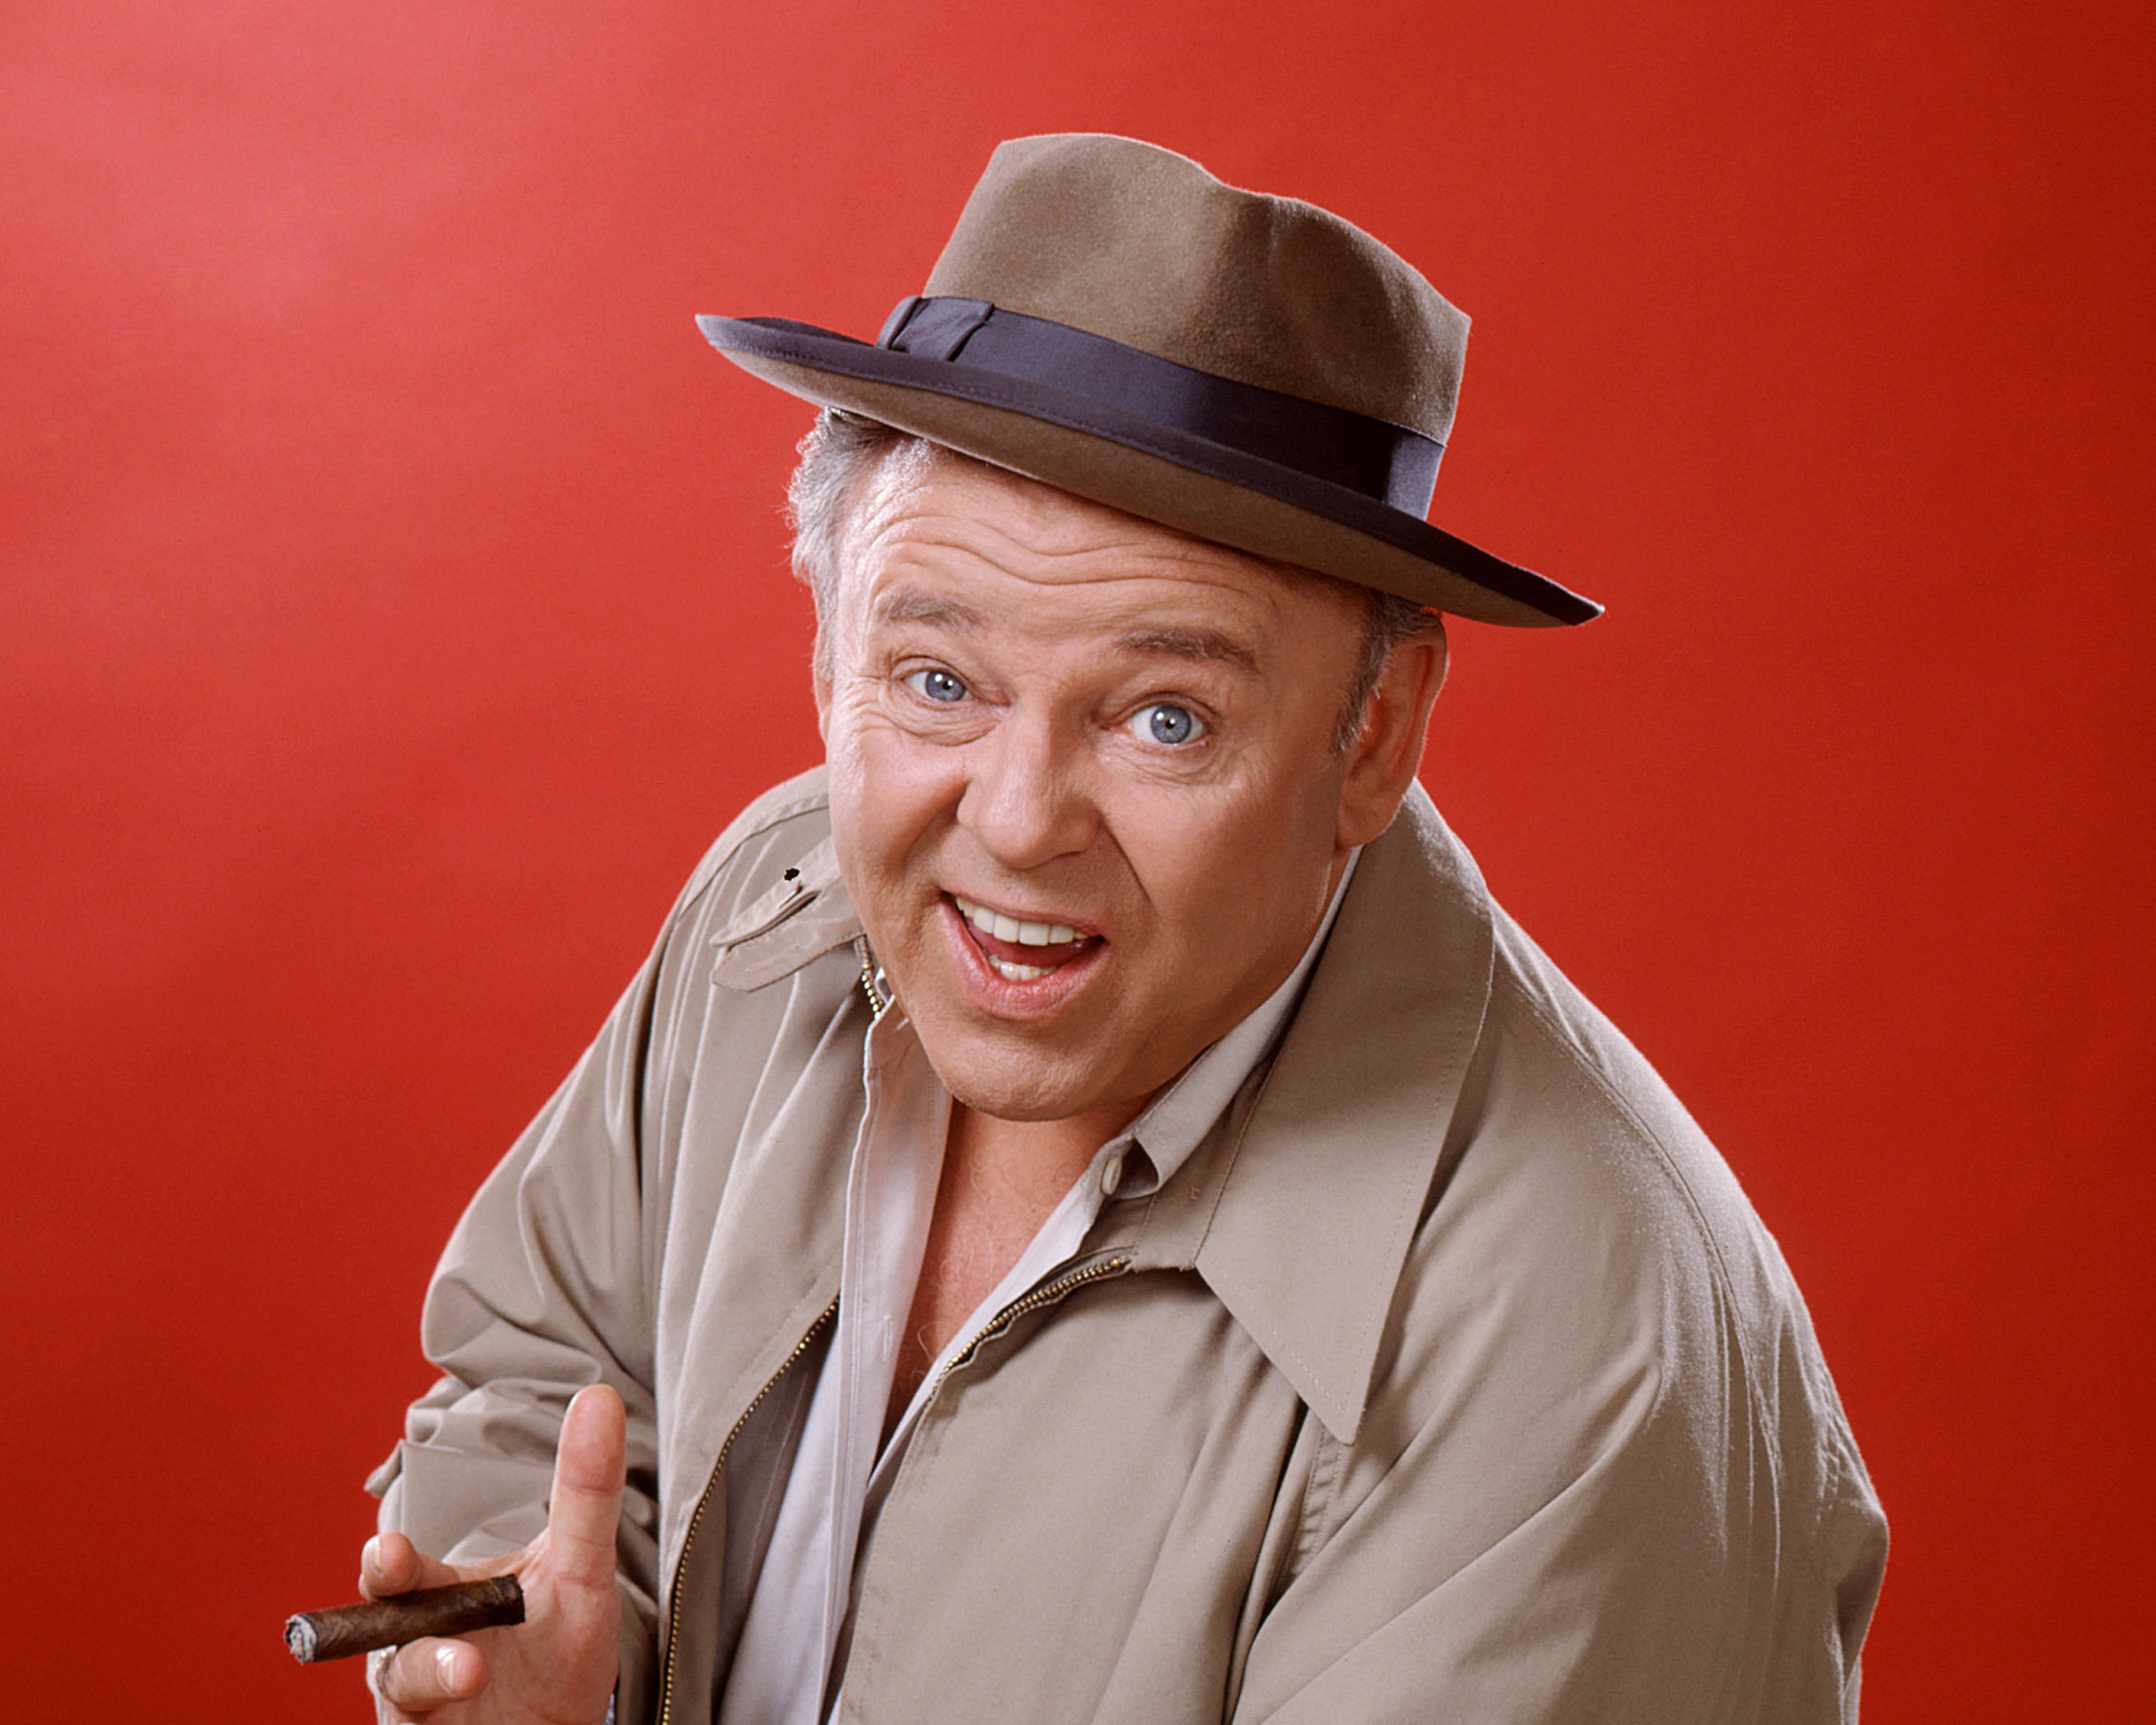 Carroll O'Connor, wearing a brown hat with a dark blue band and a beige jacket, and holding a cigar against a red background as Archie Bunker in 'All in the Family', circa 1975